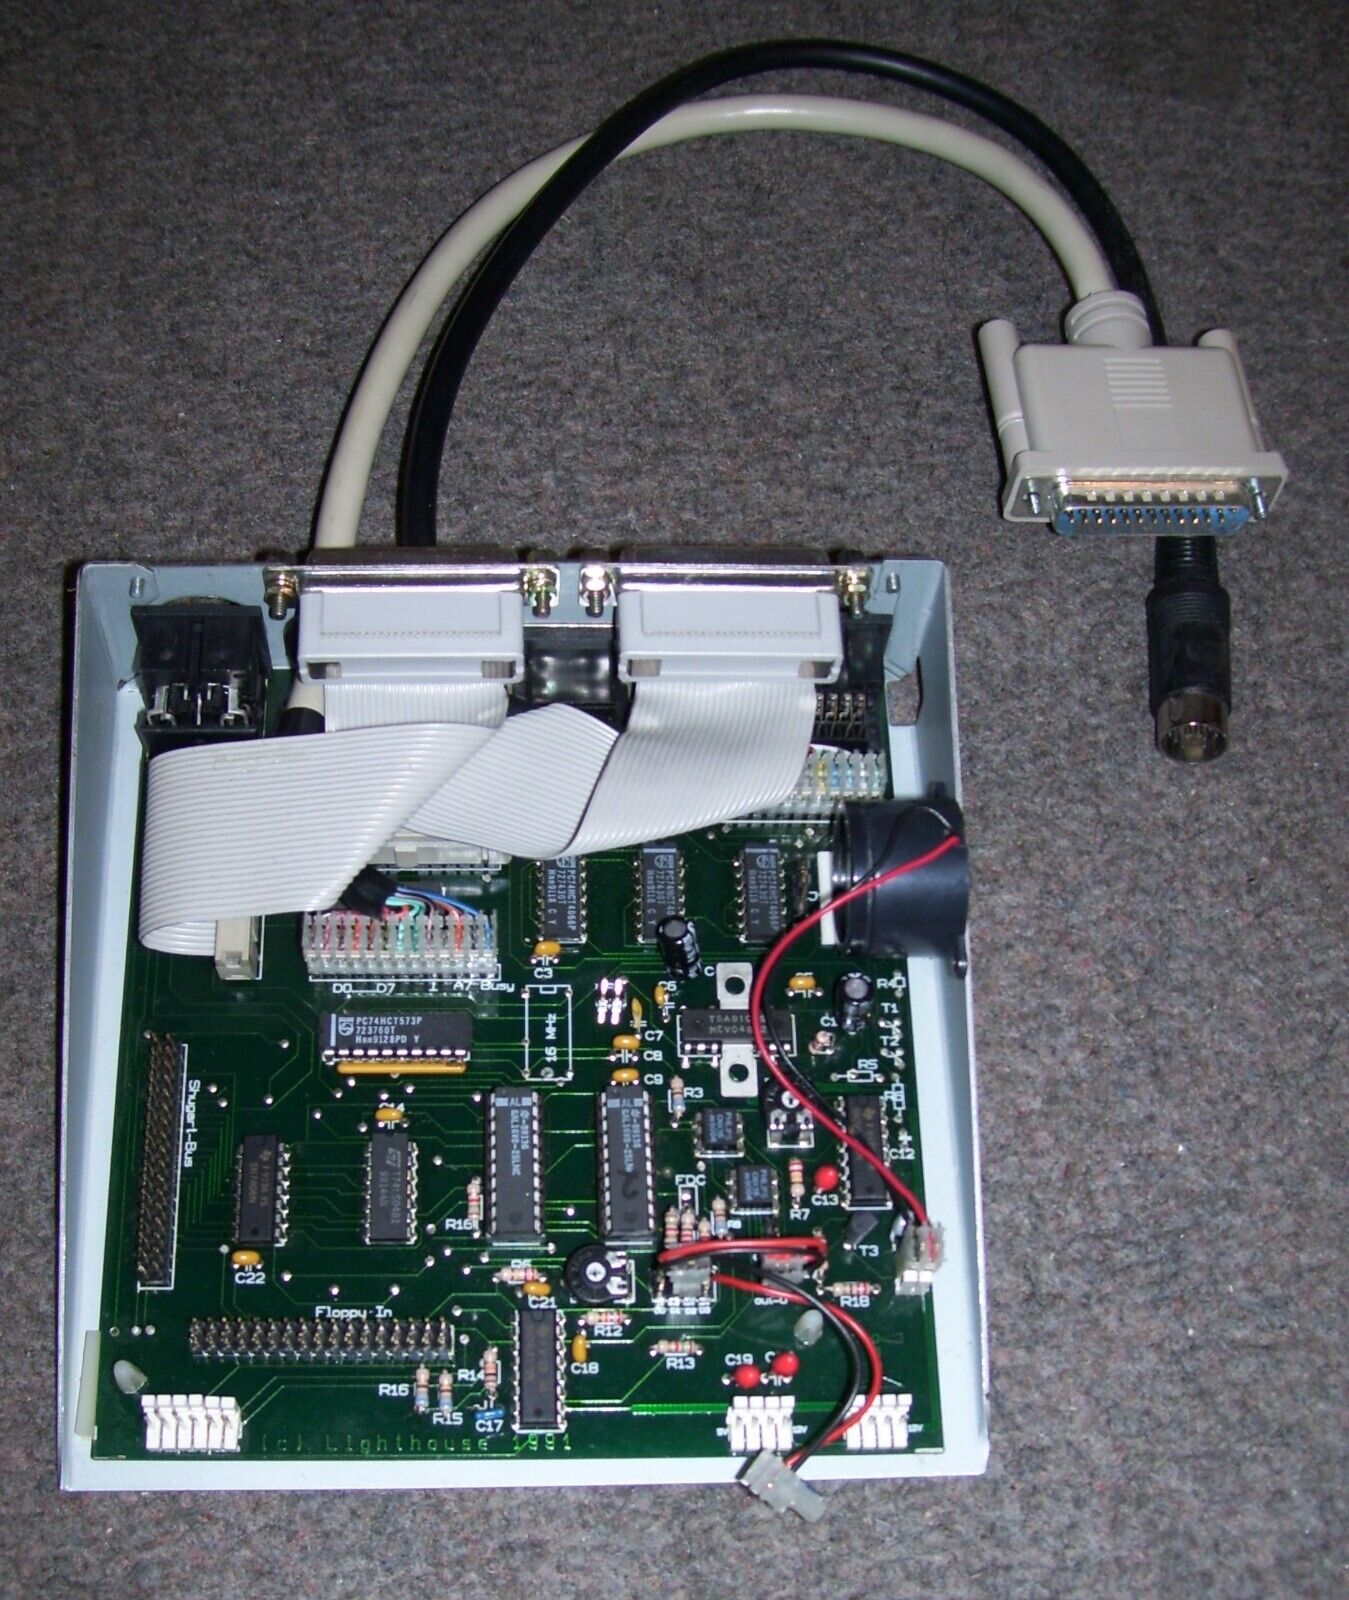 NEW Atari ST STE Computer Lighthouse Case Expansion Card Octobus Octobrain PARTS